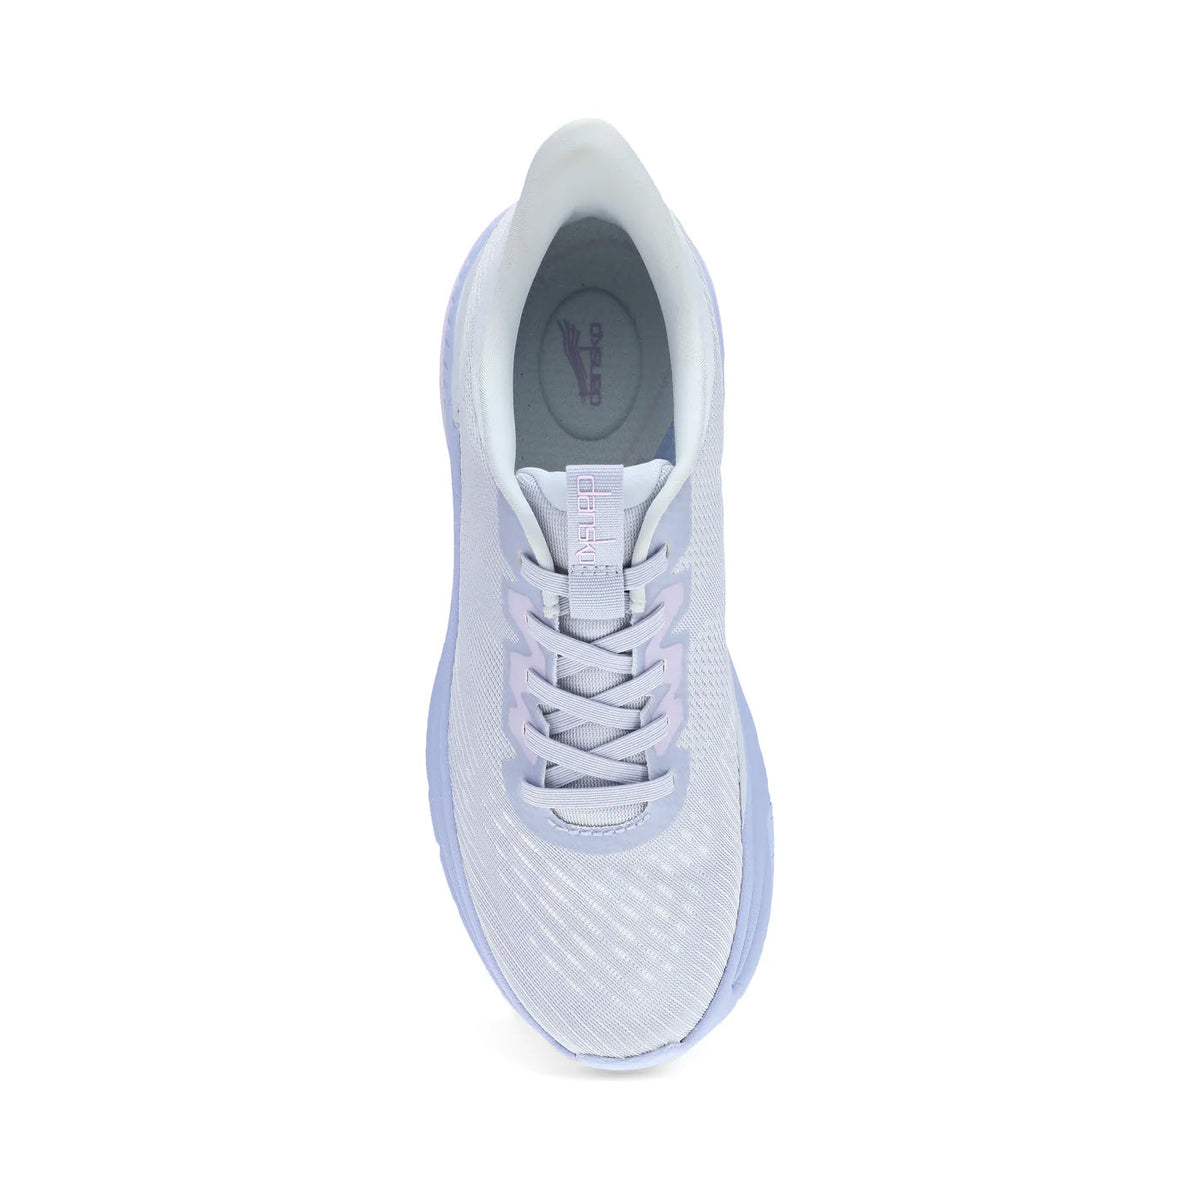 A single lilac Dansko walking sneaker viewed from above on a white background.